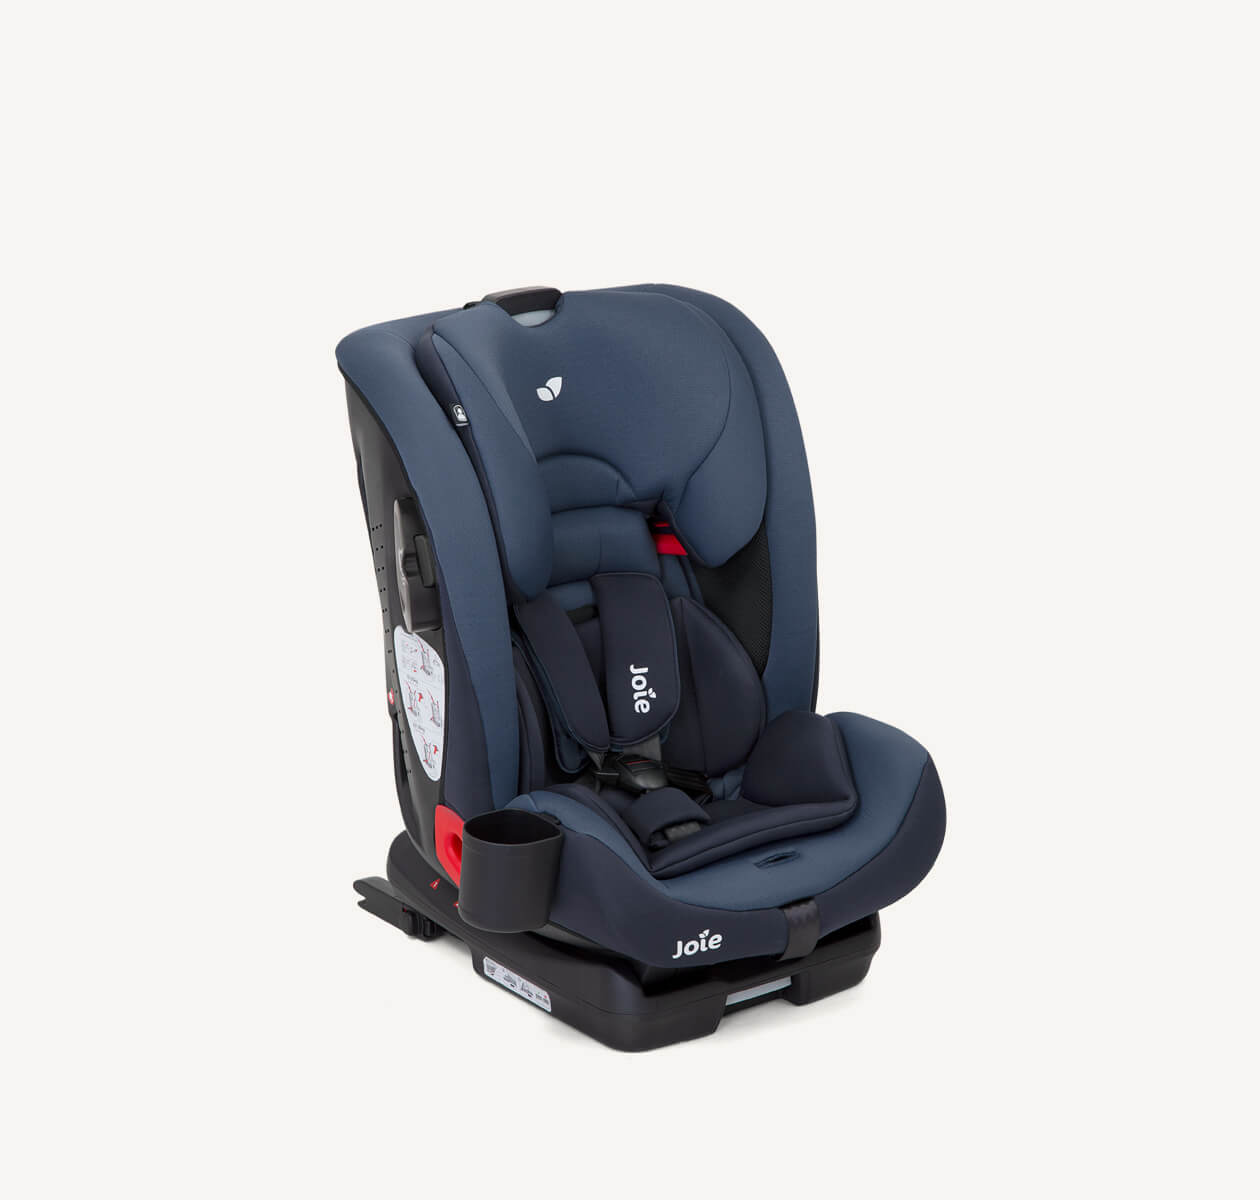 Joie bold R toddler car seat in dark blue from a right angle.